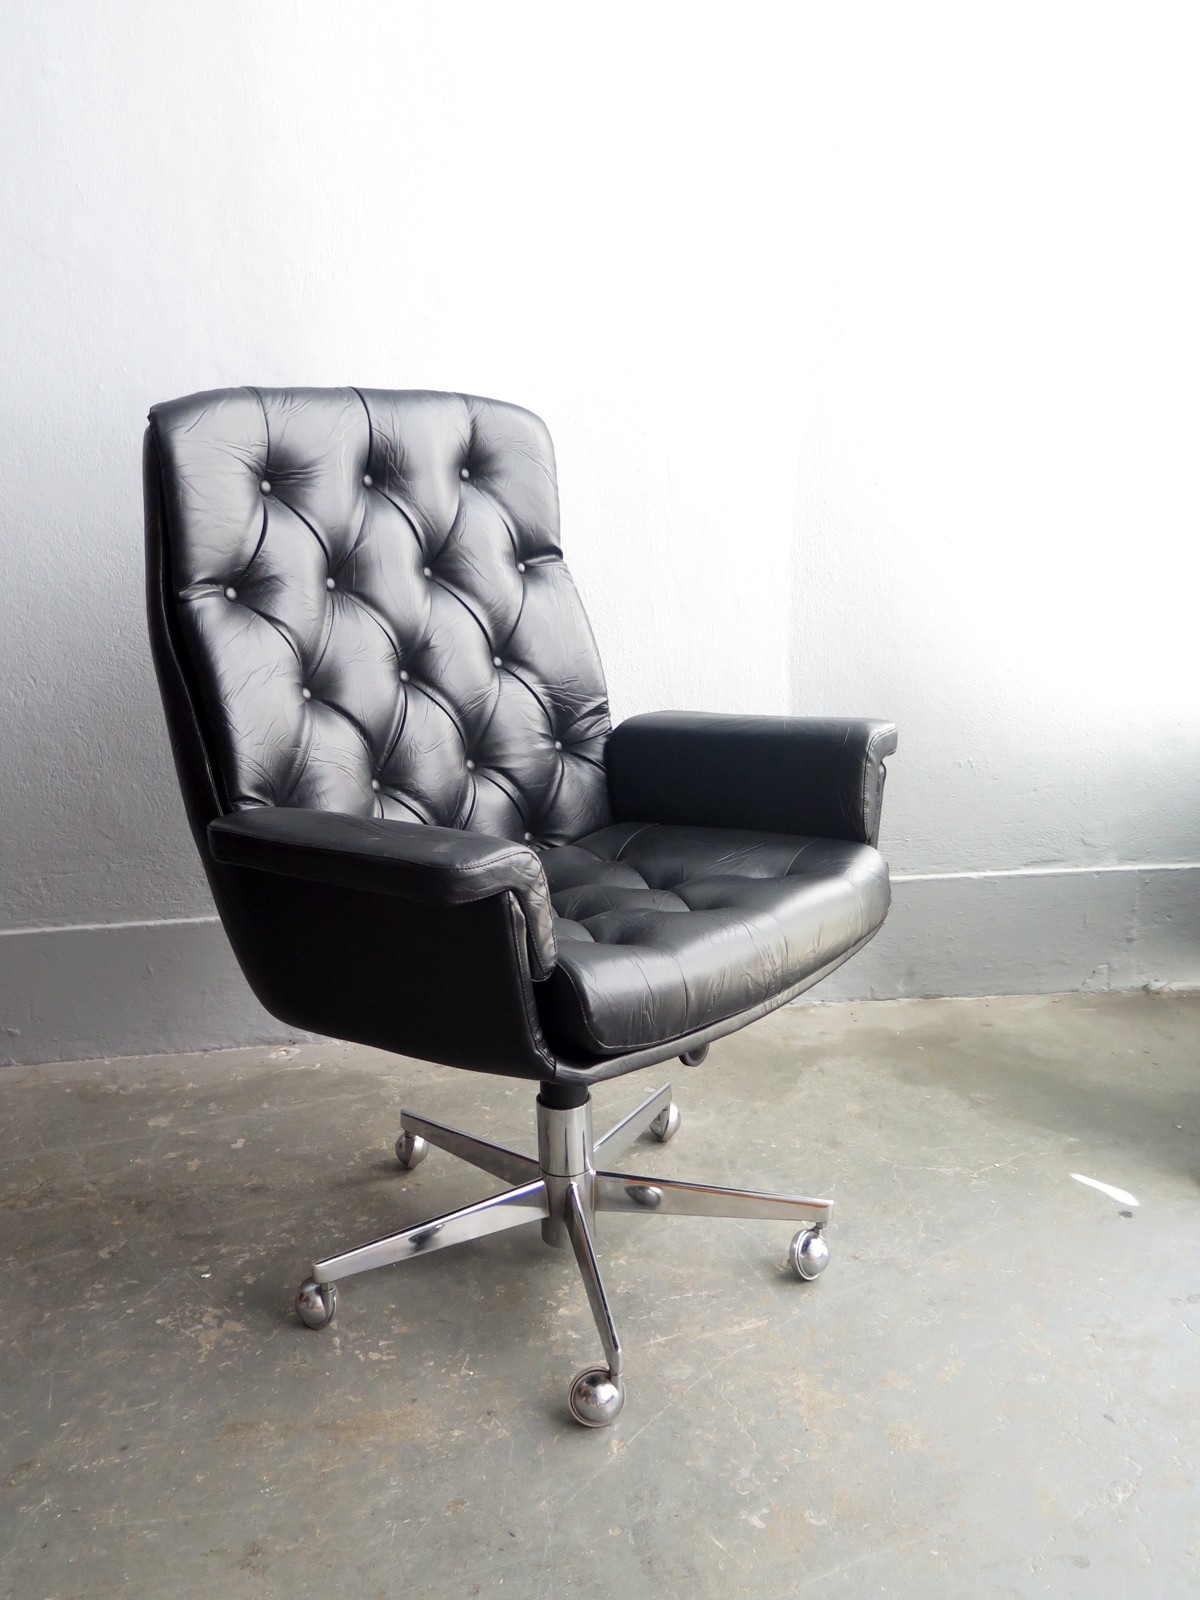 Vintage Swivel office chair with wheels - 1960s - Design Market